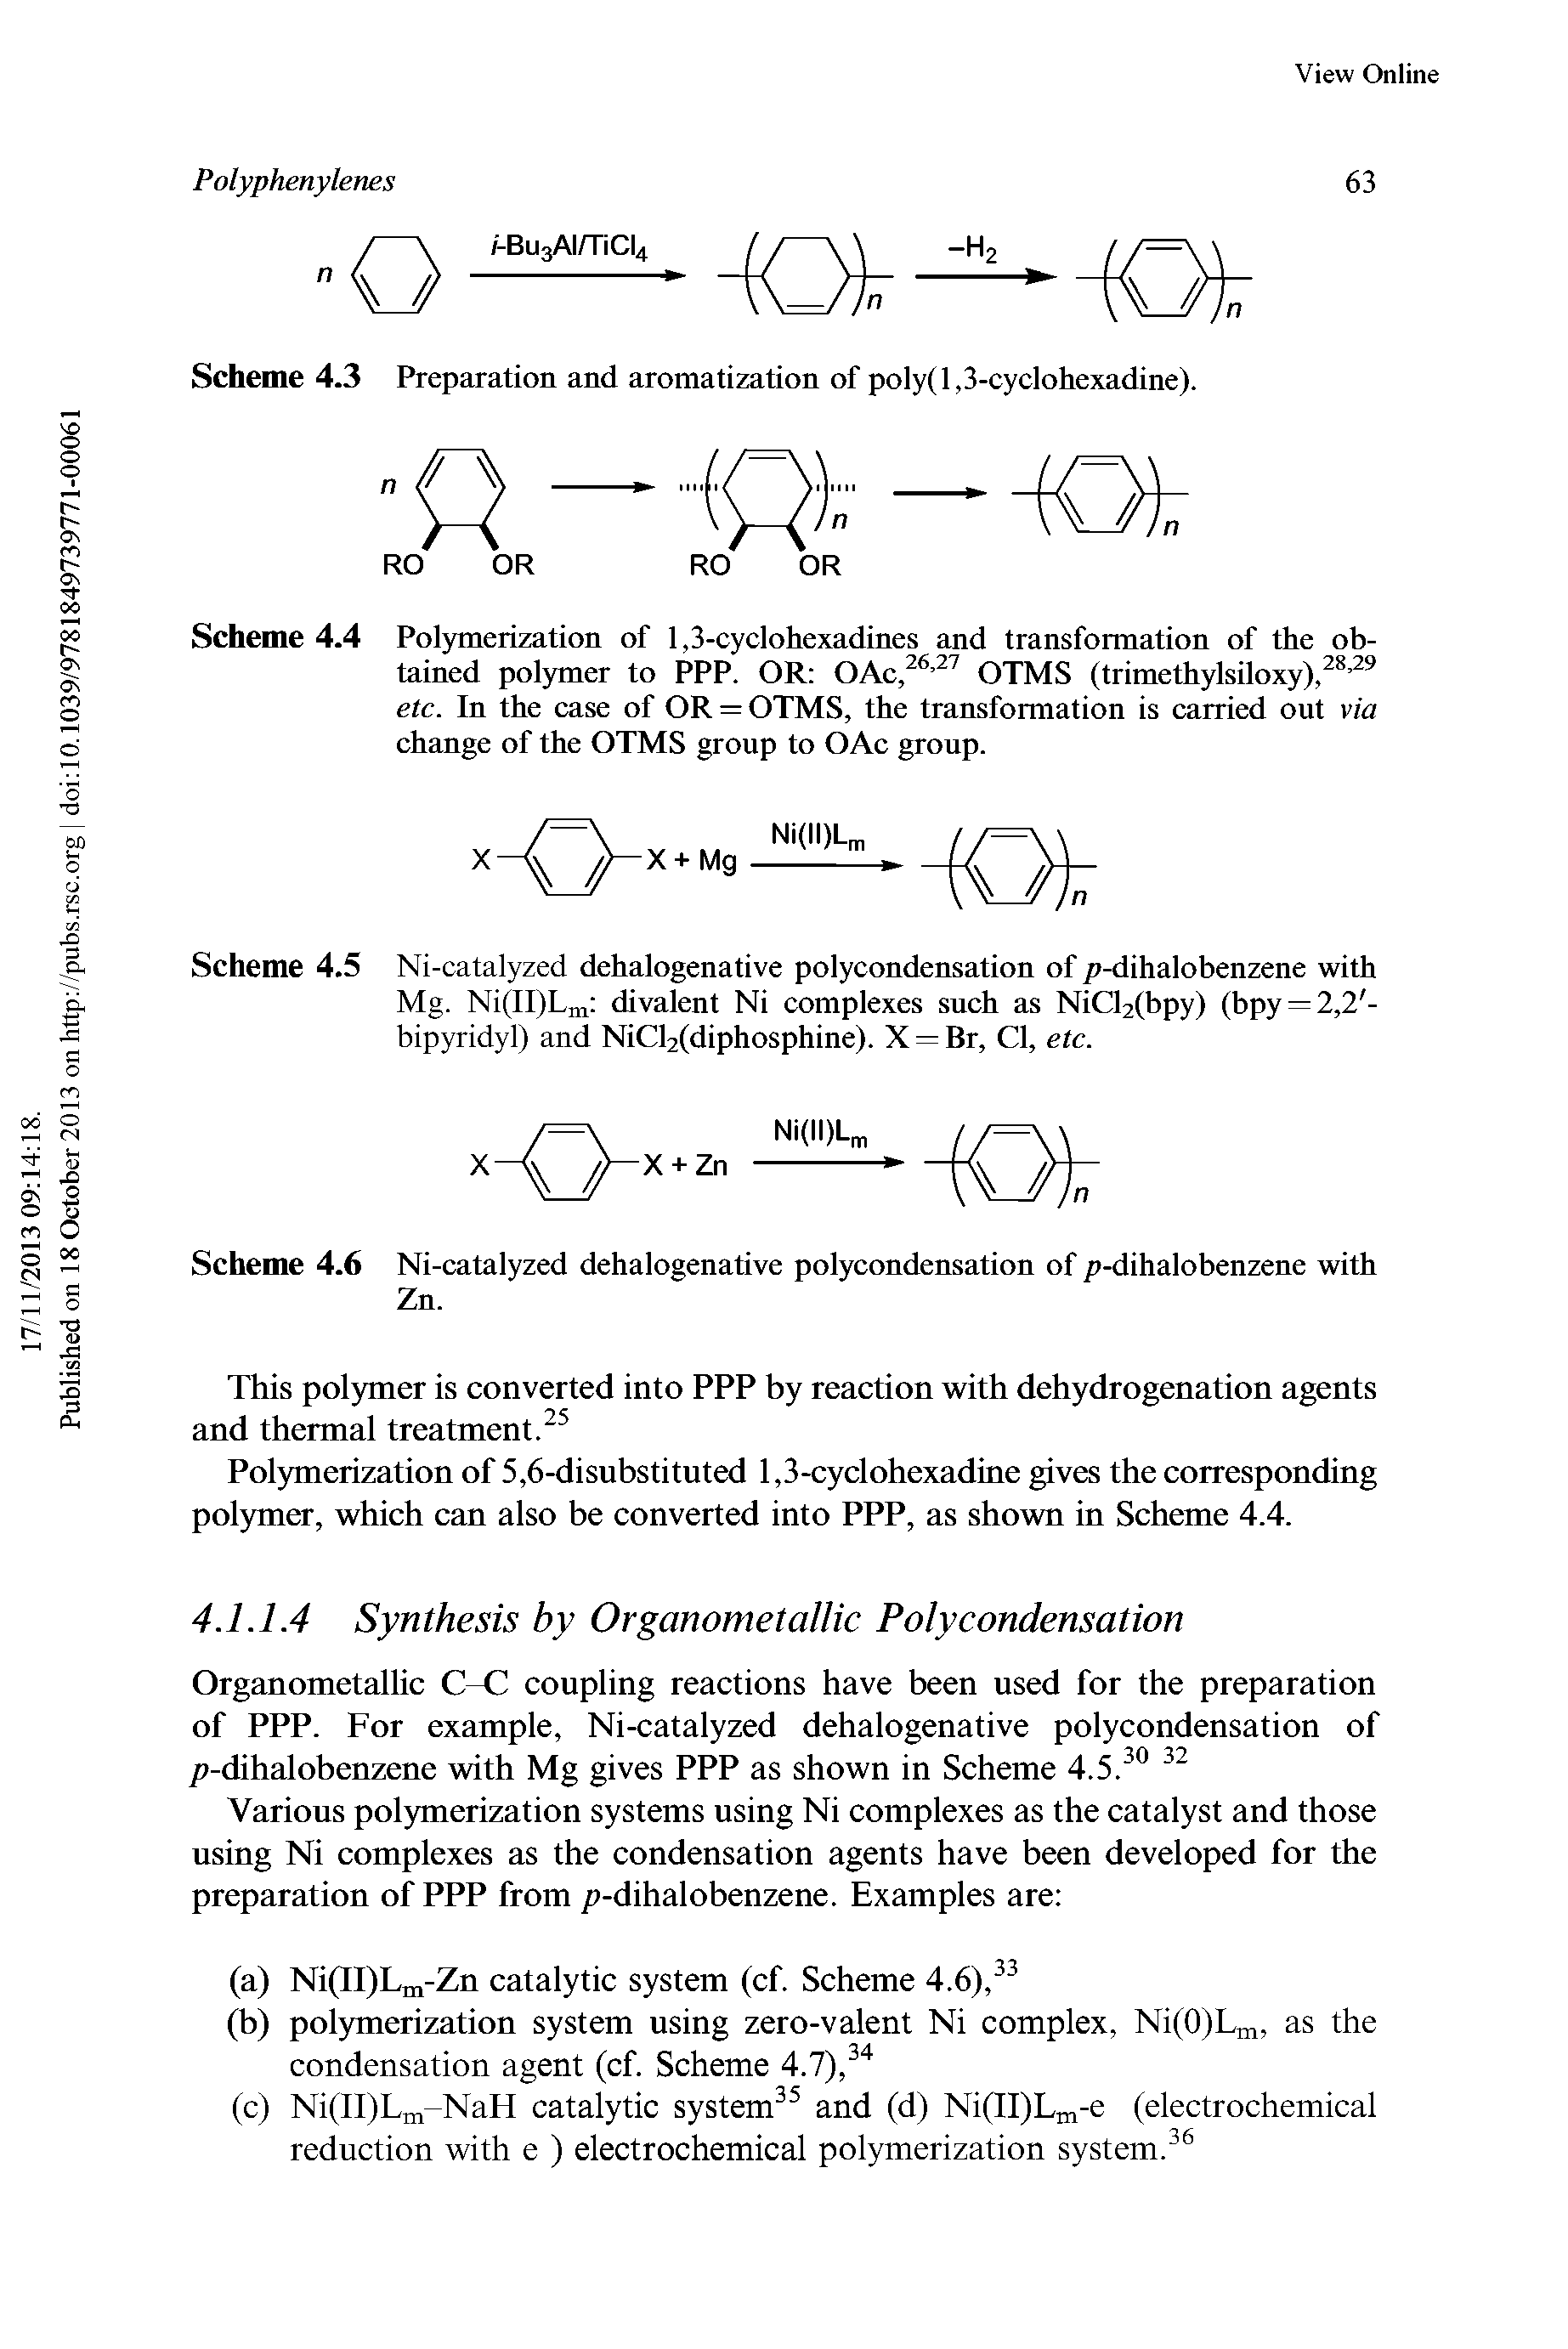 Scheme 4.5 Ni-catalyzed dehalogenative polycondensation of p-dihalobenzene with Mg. Ni(II)Lm divalent Ni complexes such as NiCl2(bpy) (bpy = 2,2 -bipyridyl) and NiCl2(diphosphine). X = Br, Cl, etc.